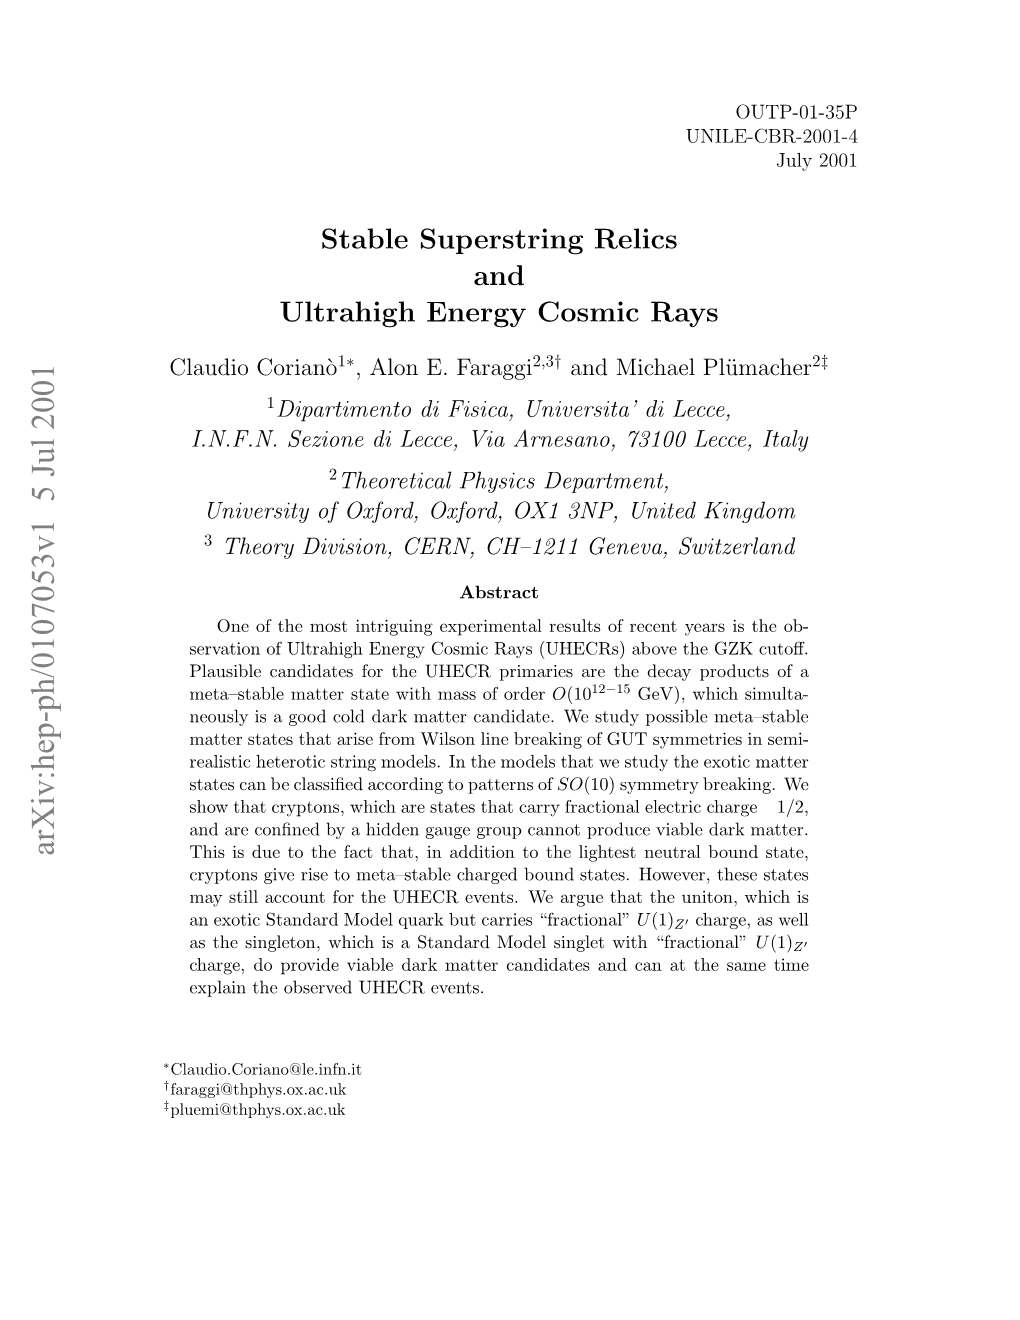 Stable Superstring Relics and Ultrahigh Energy Cosmic Rays